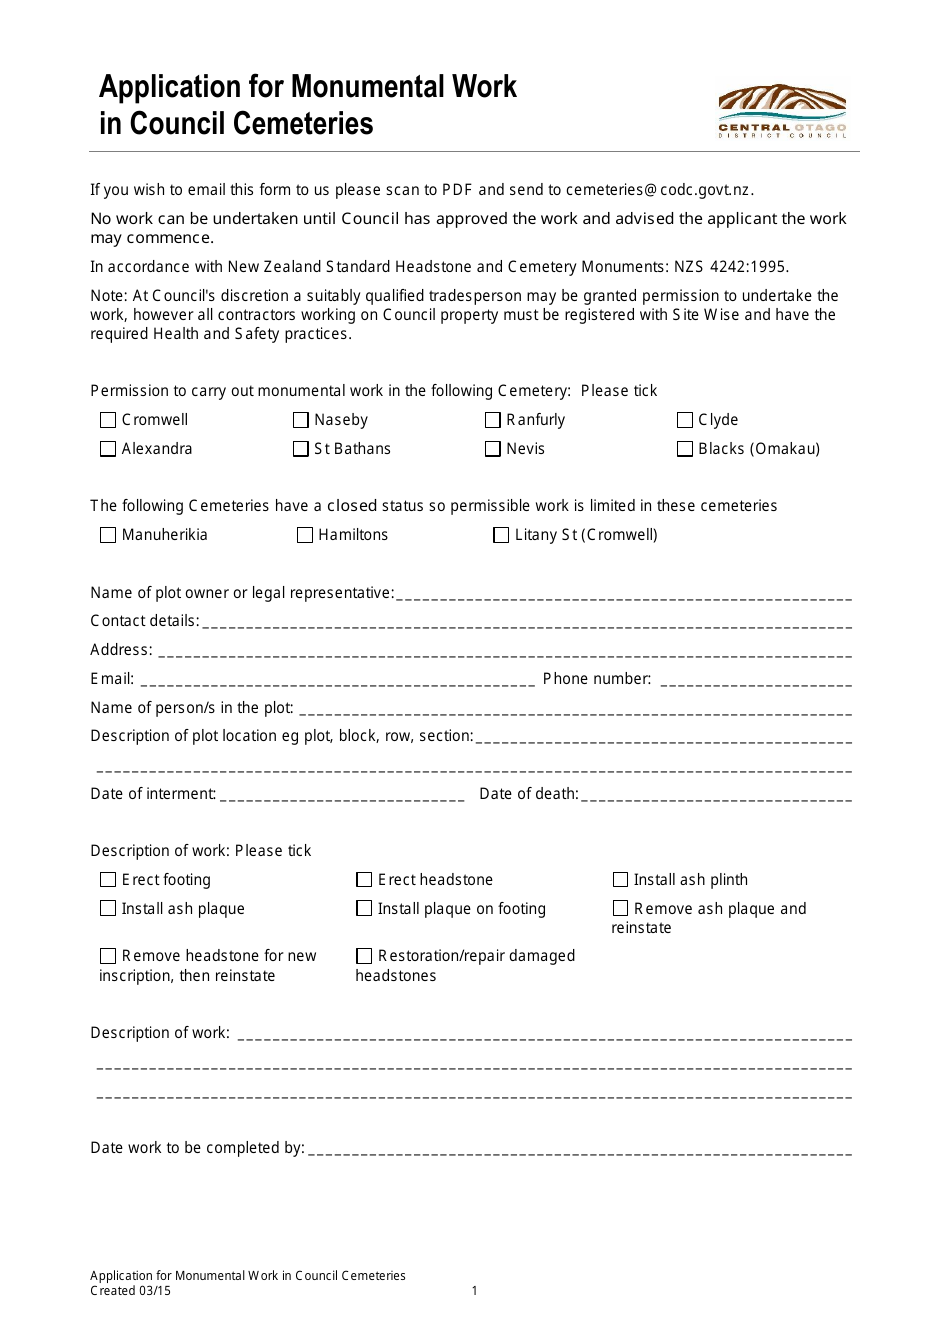 Application for Monumental Work in Council Cemeteries - Otago, New Zealand, Page 1